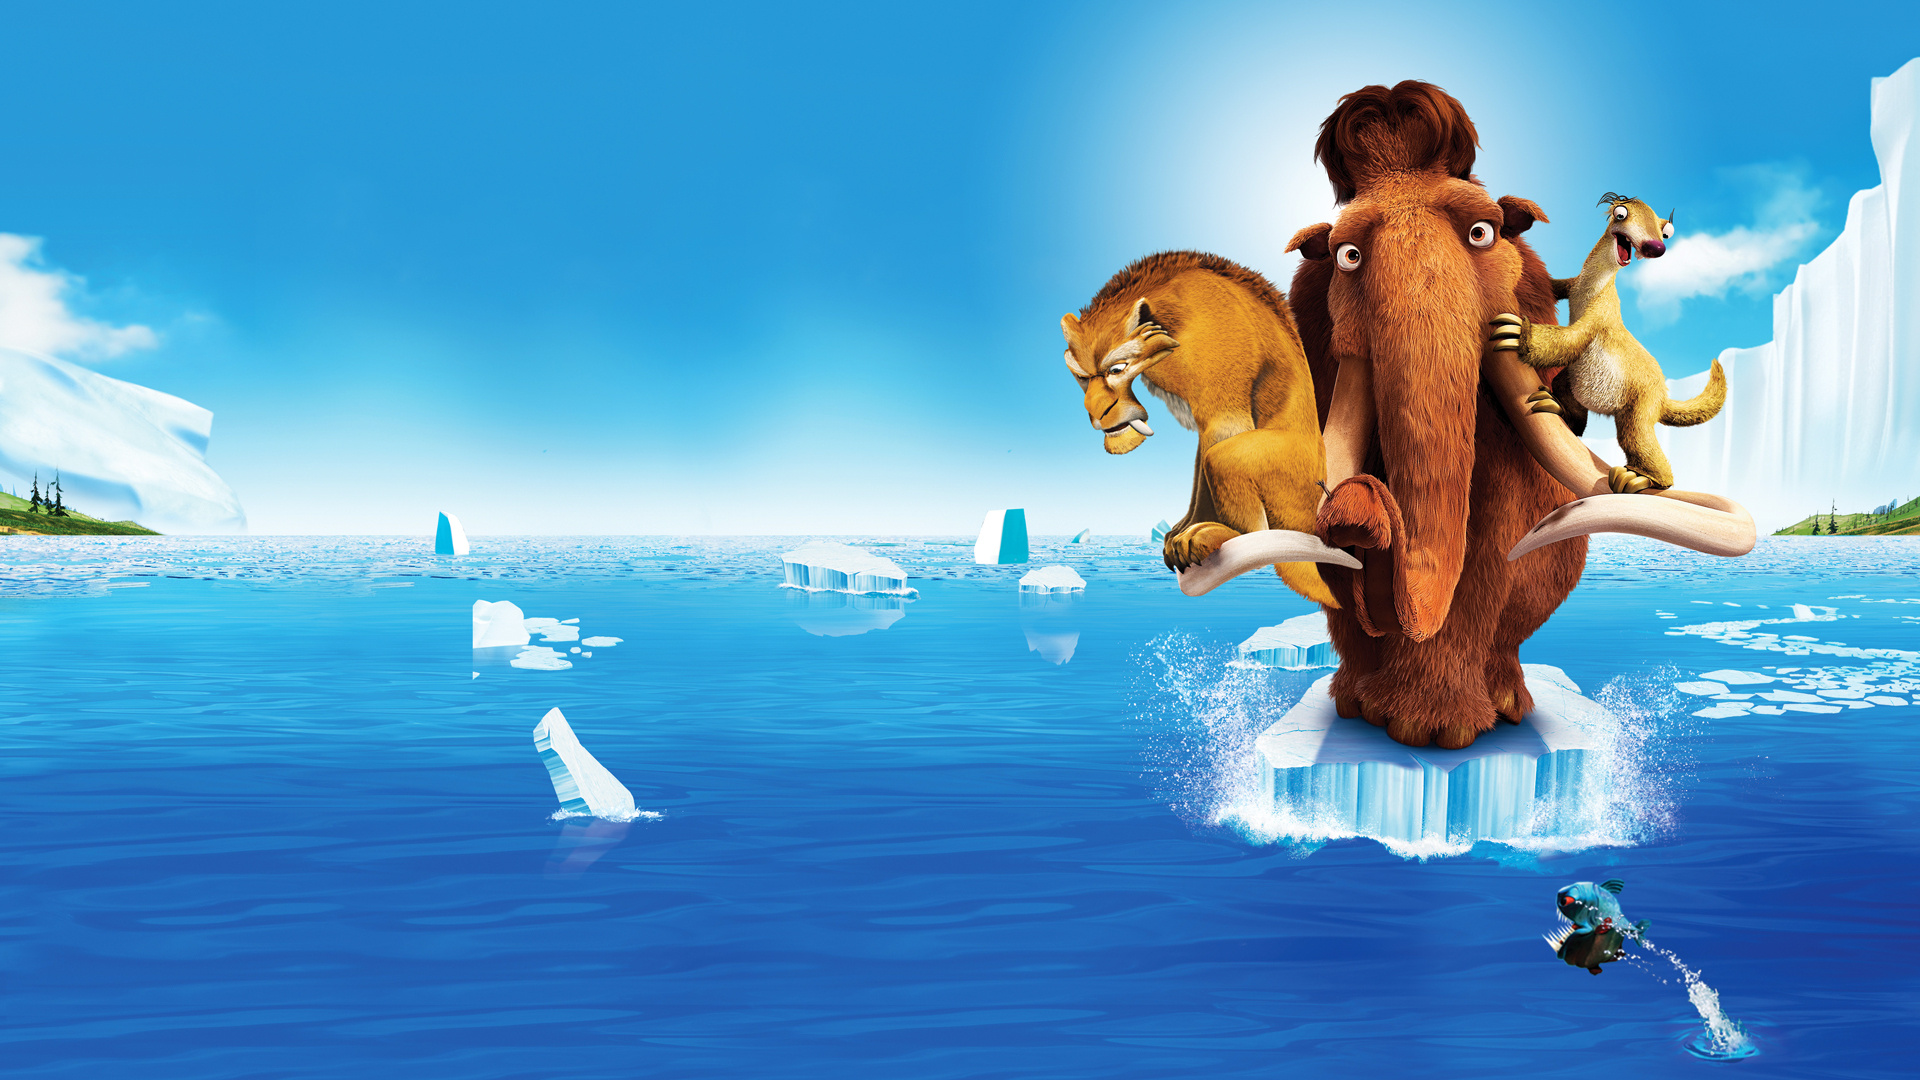 Ice Age characters, Prehistoric adventure, Frozen landscapes, Sid the sloth, 1920x1080 Full HD Desktop